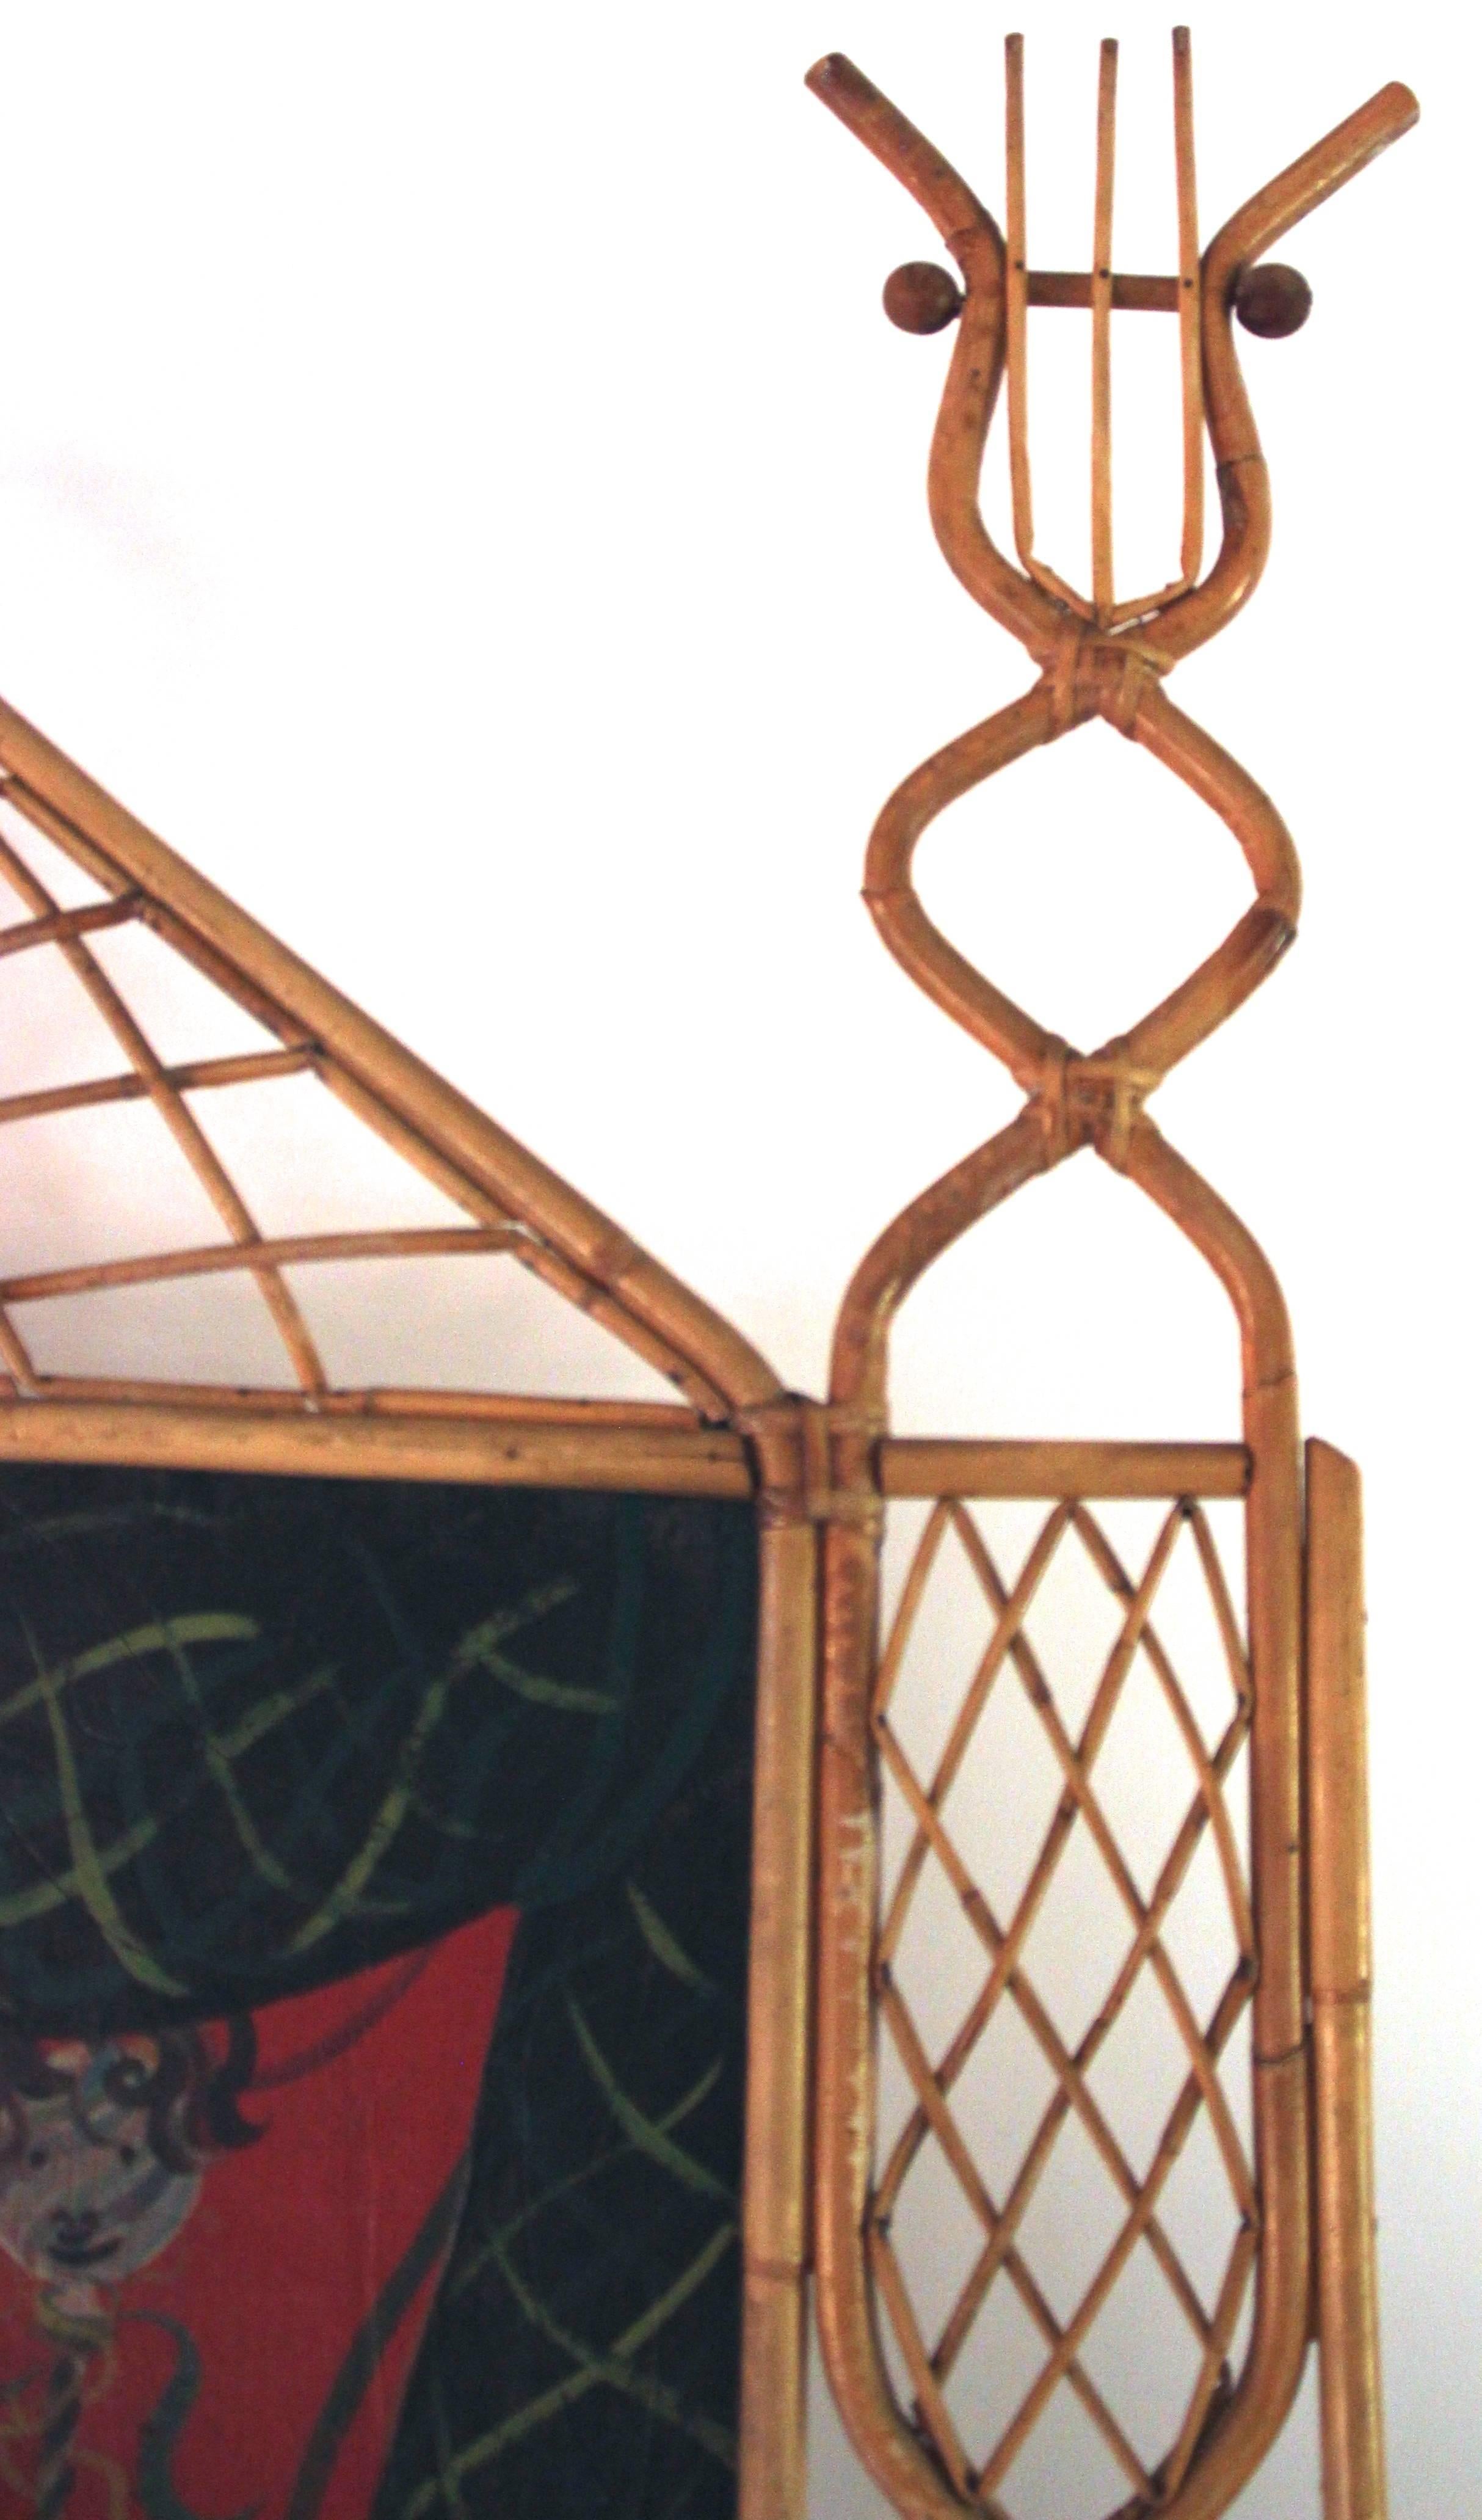 René Fumeron.
Frame in rattan decorated with lyres, 
painted canvas.
Signed on the right corner,
Circa 1970, France.
Measures: Height: 145 cm, width: 120 cm, depth: 2 cm.